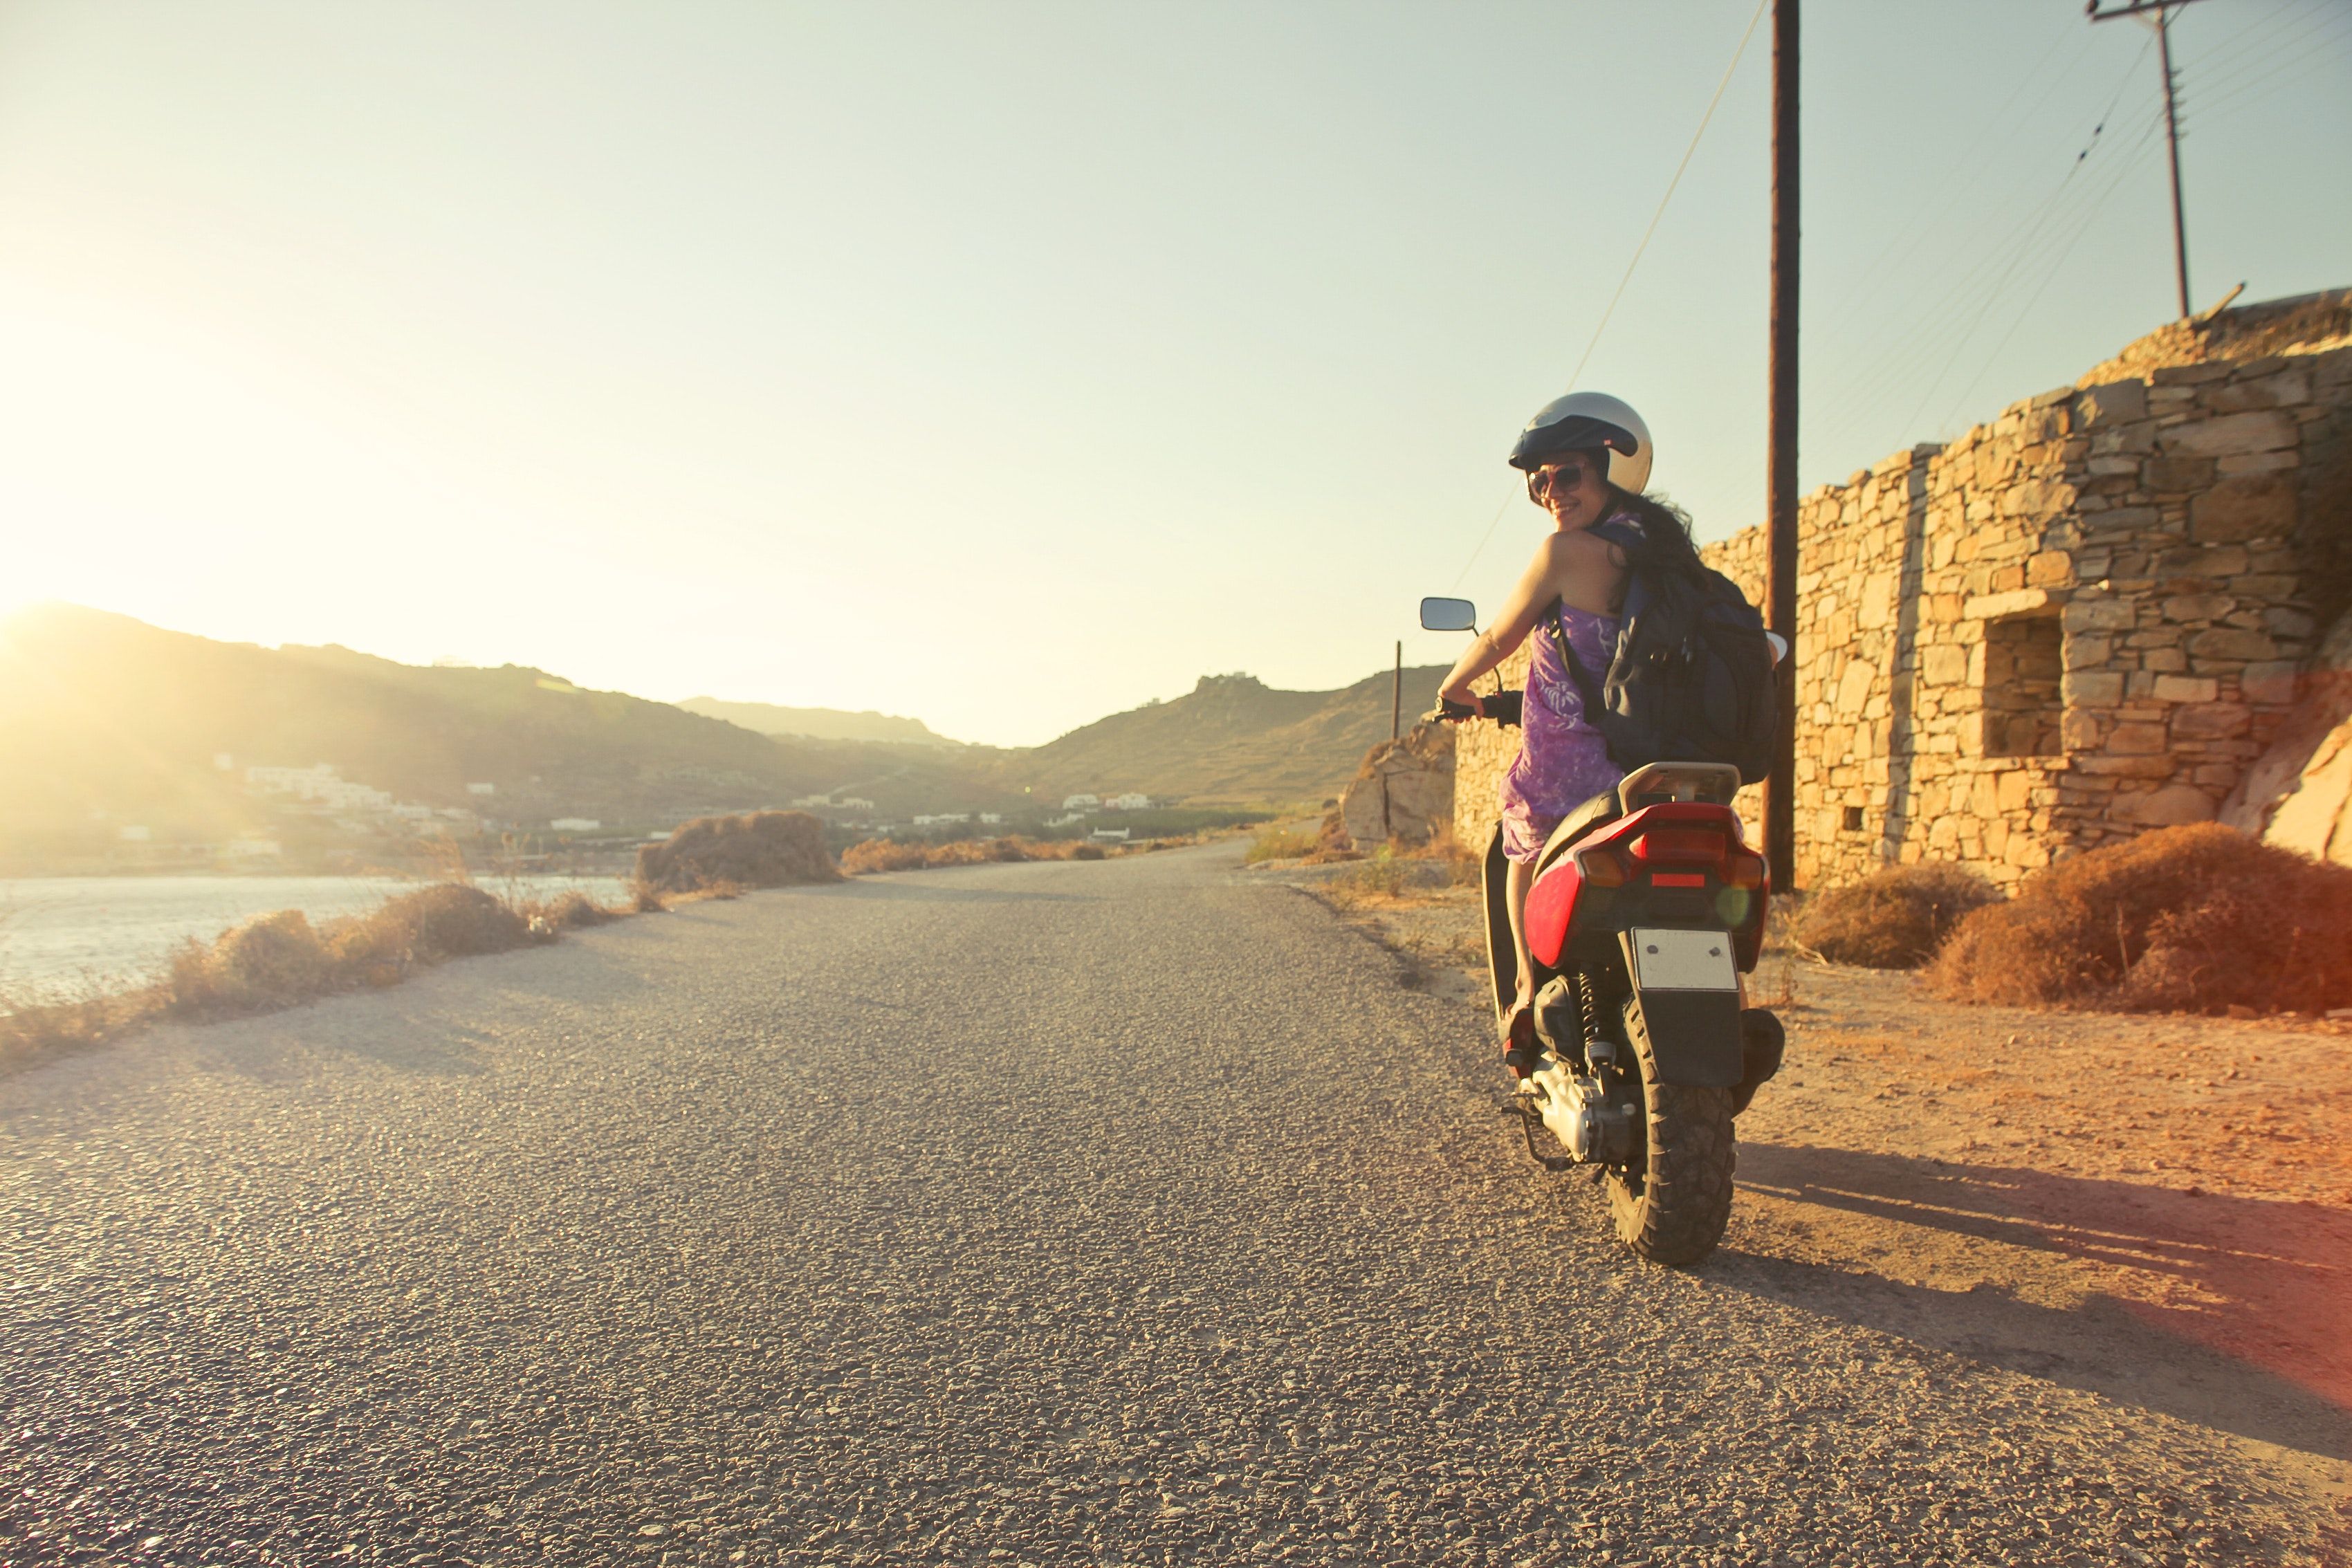 Ranking of the best motorcycles for travel in 2020